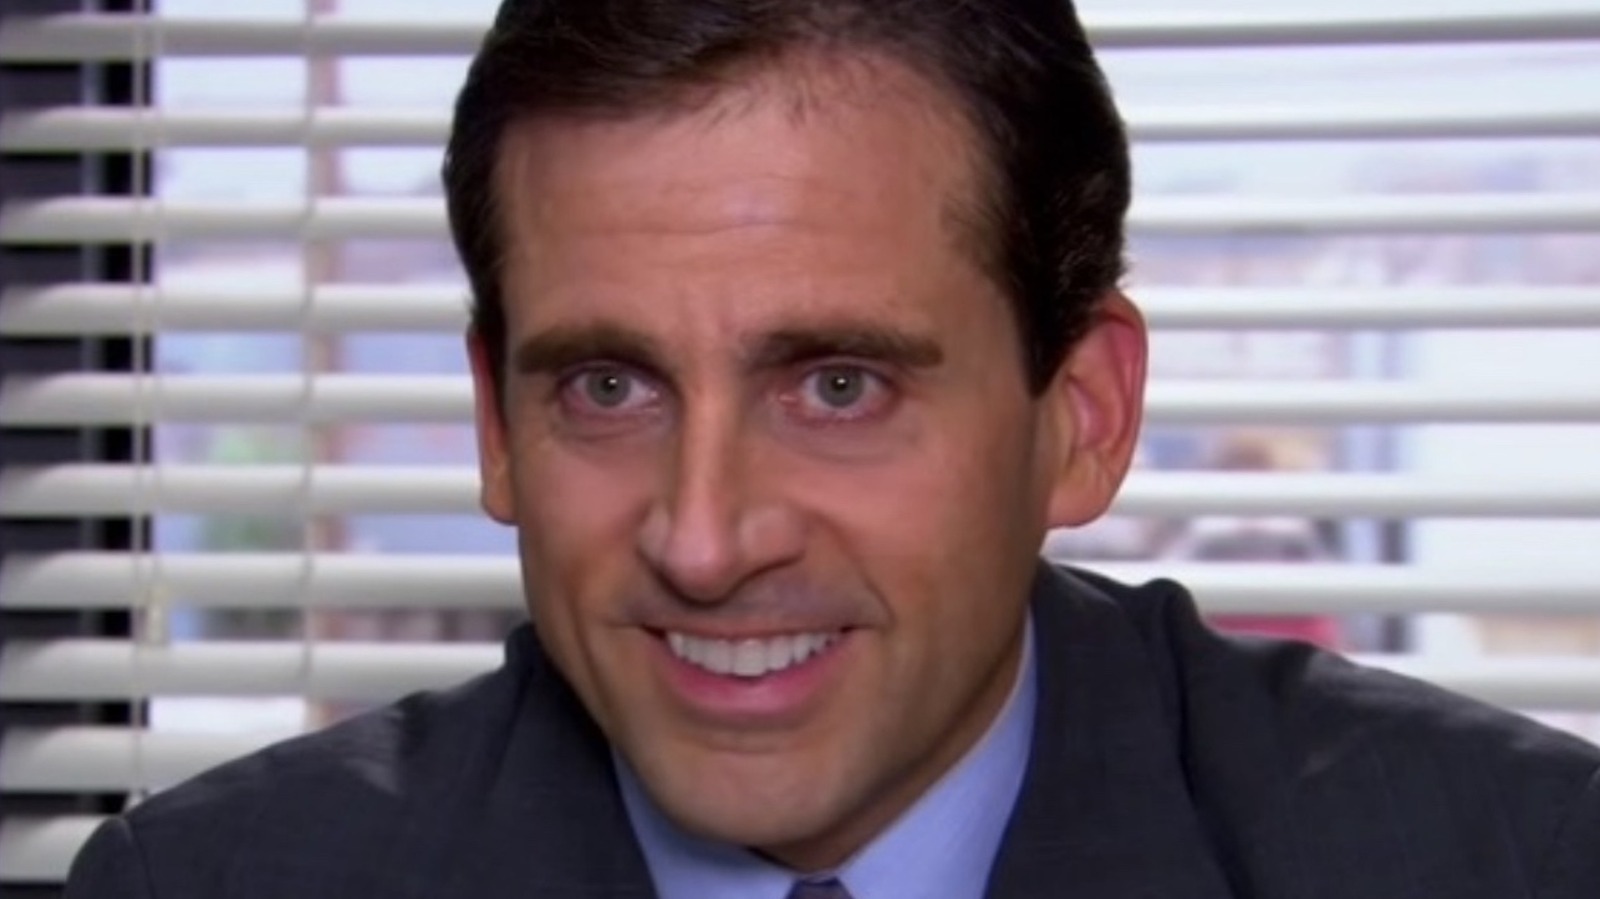 The Office Character That Fans Wanted To See Get More